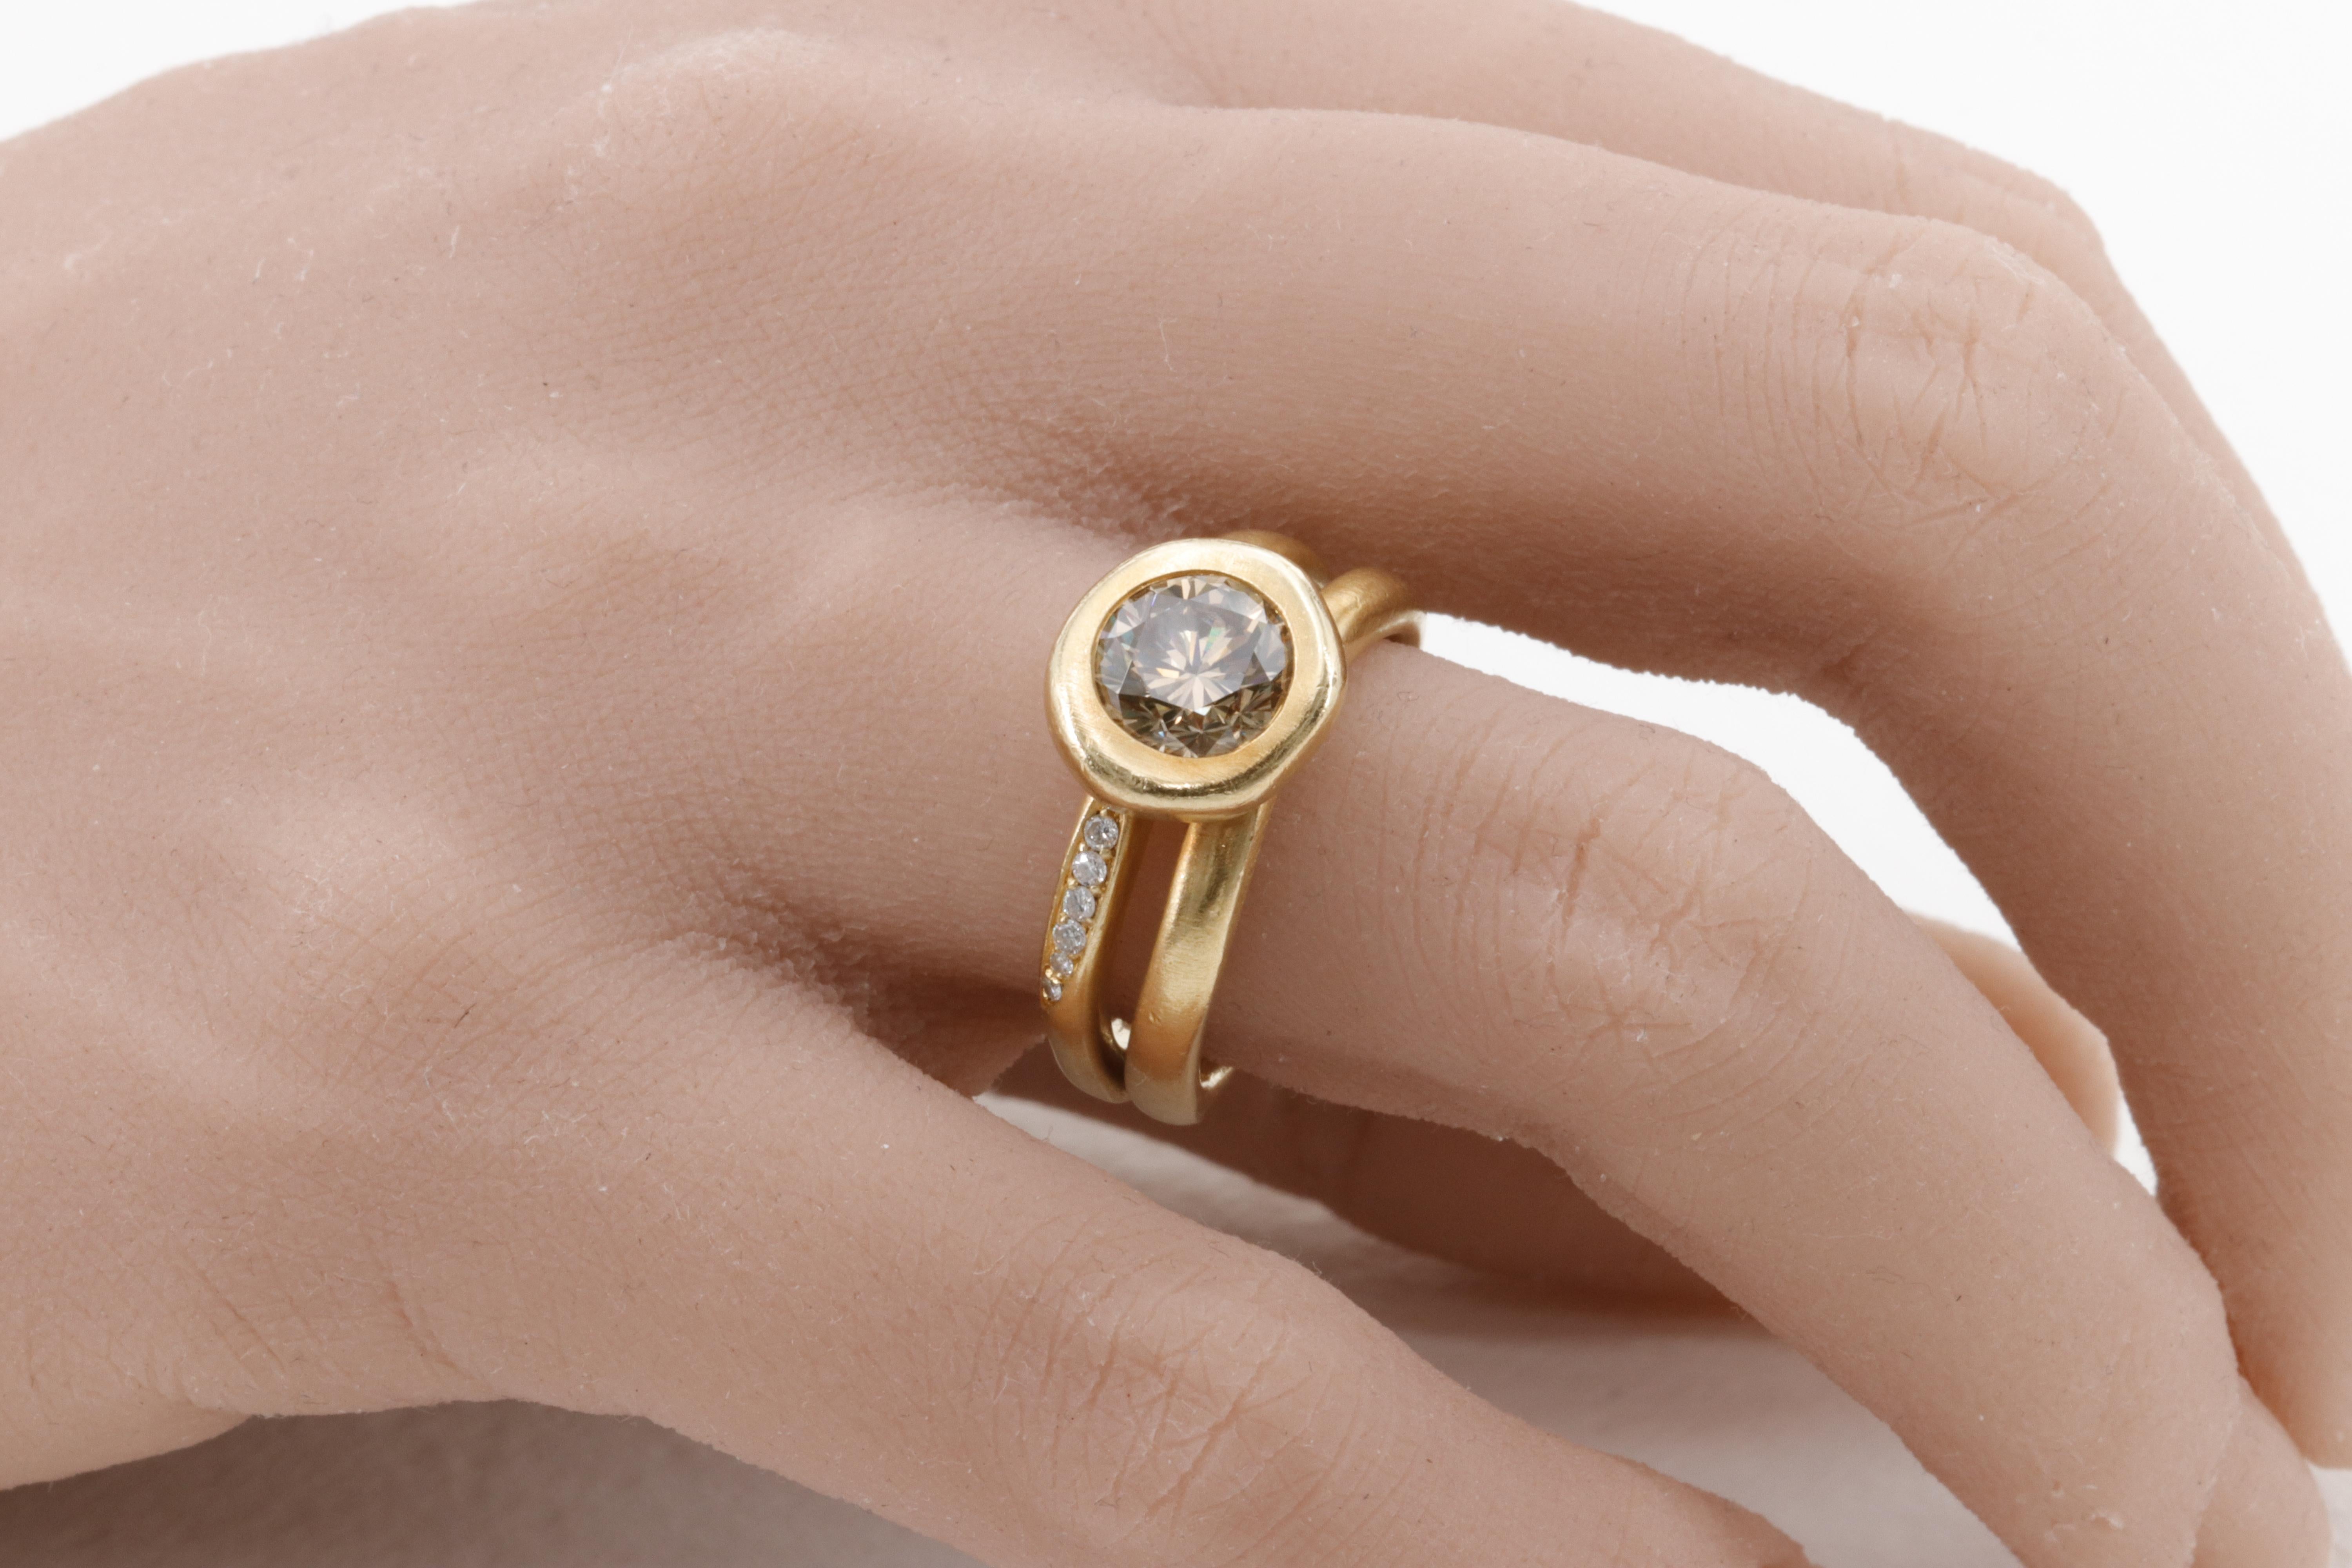 A beautiful statement ring by H. Stern, featuring a warm cognac colored round brilliant cut diamond center stone, bezel set in matte finished 18 karat yellow gold by the master craftsmen at H. Stern. The ring features an additional 6 fine quality